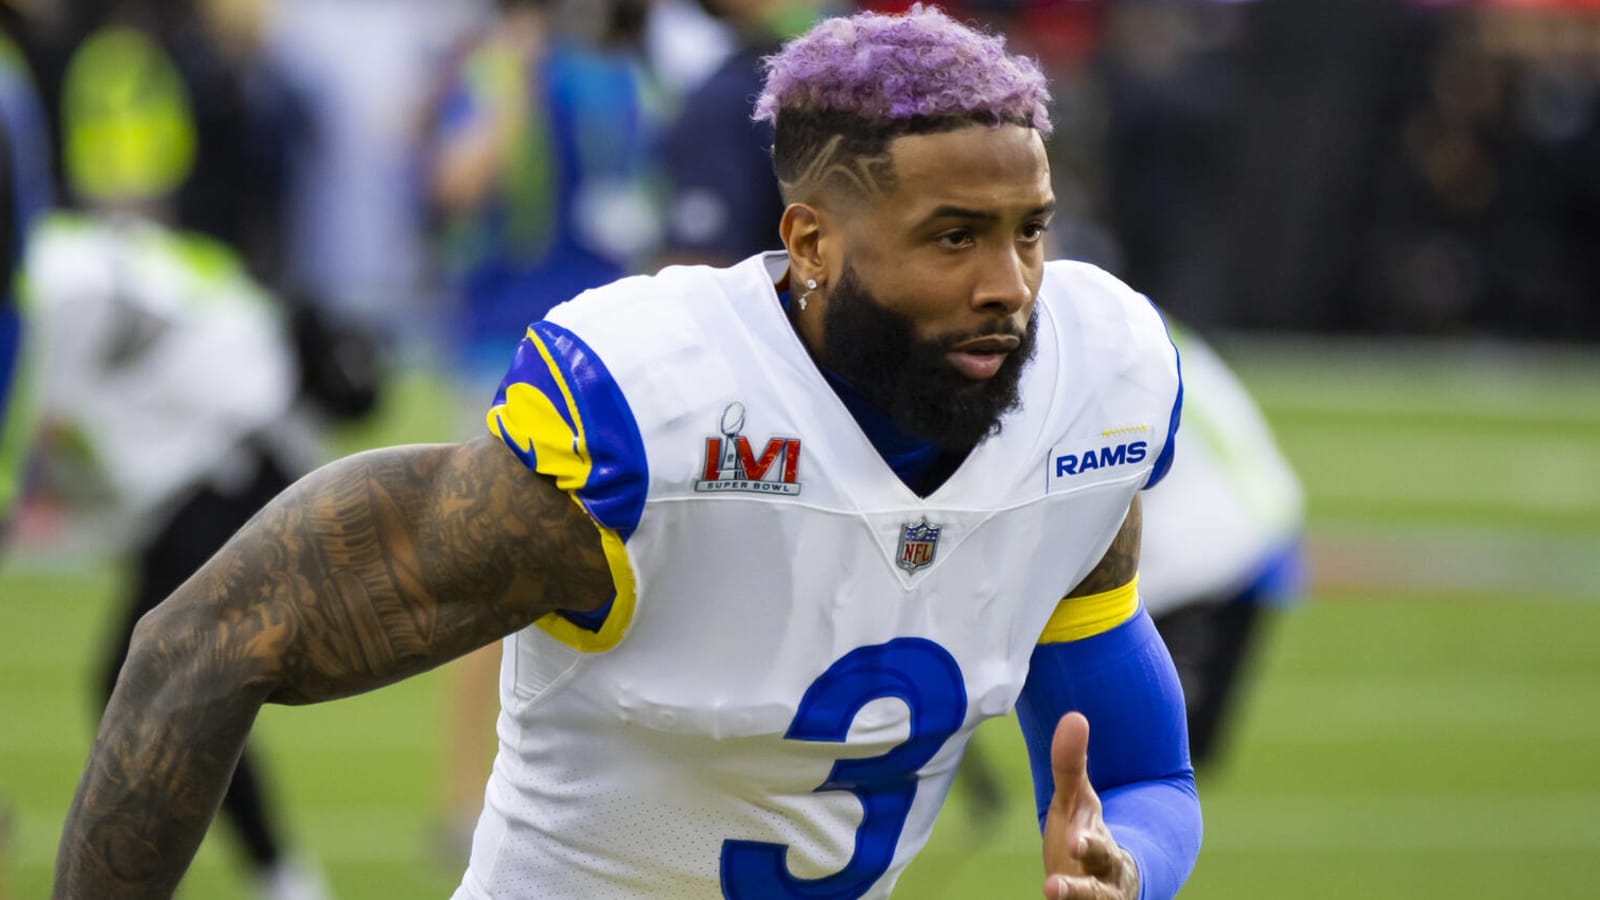 Cowboys interested in Odell Beckham Jr. amid push to improve WRs